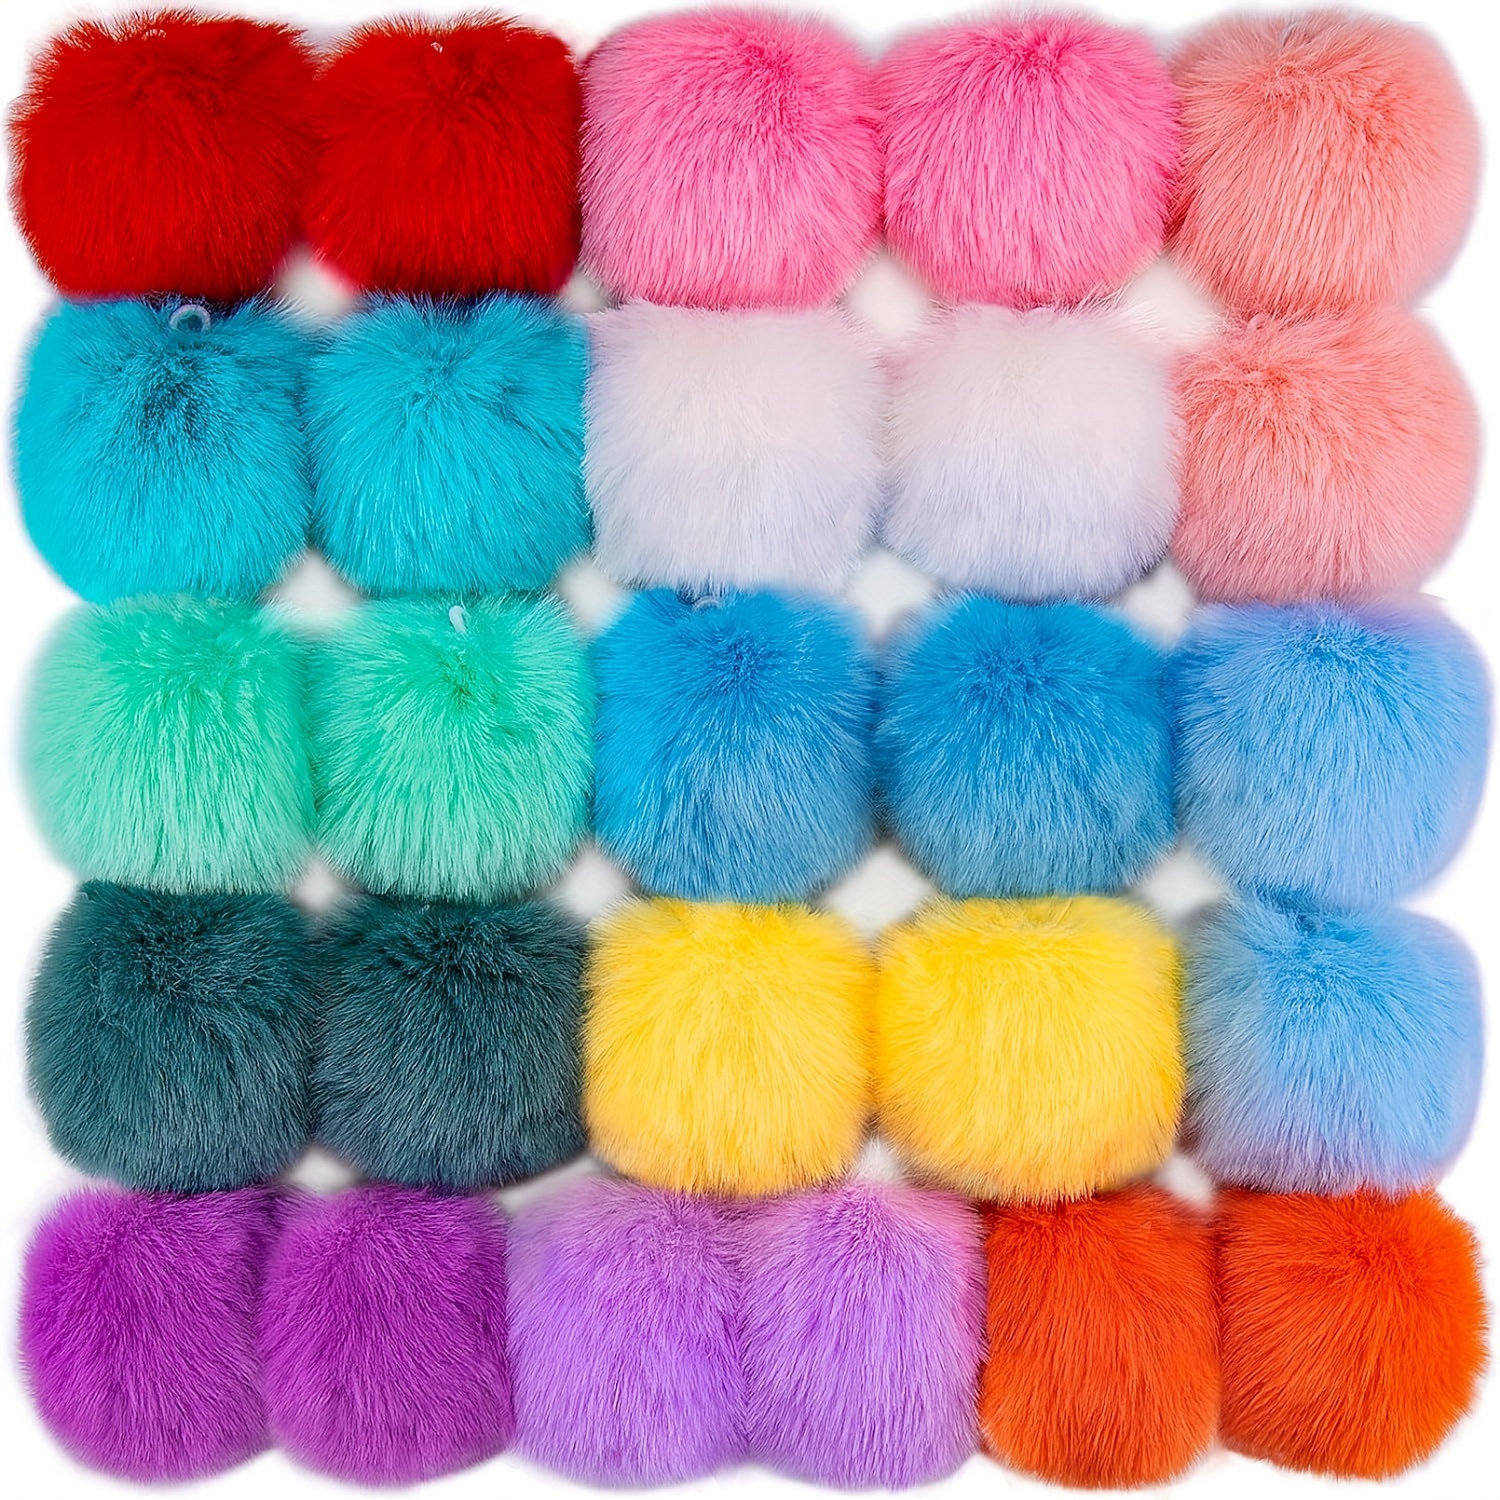 

26-piece Luxurious Faux Rabbit Fur Pom Poms In 13 Assorted Colors With Elastic Bands - Perfect For Diy Hats, Beanies, Shoes, Scarves, Gloves & Bag Embellishments By Gdgdsy